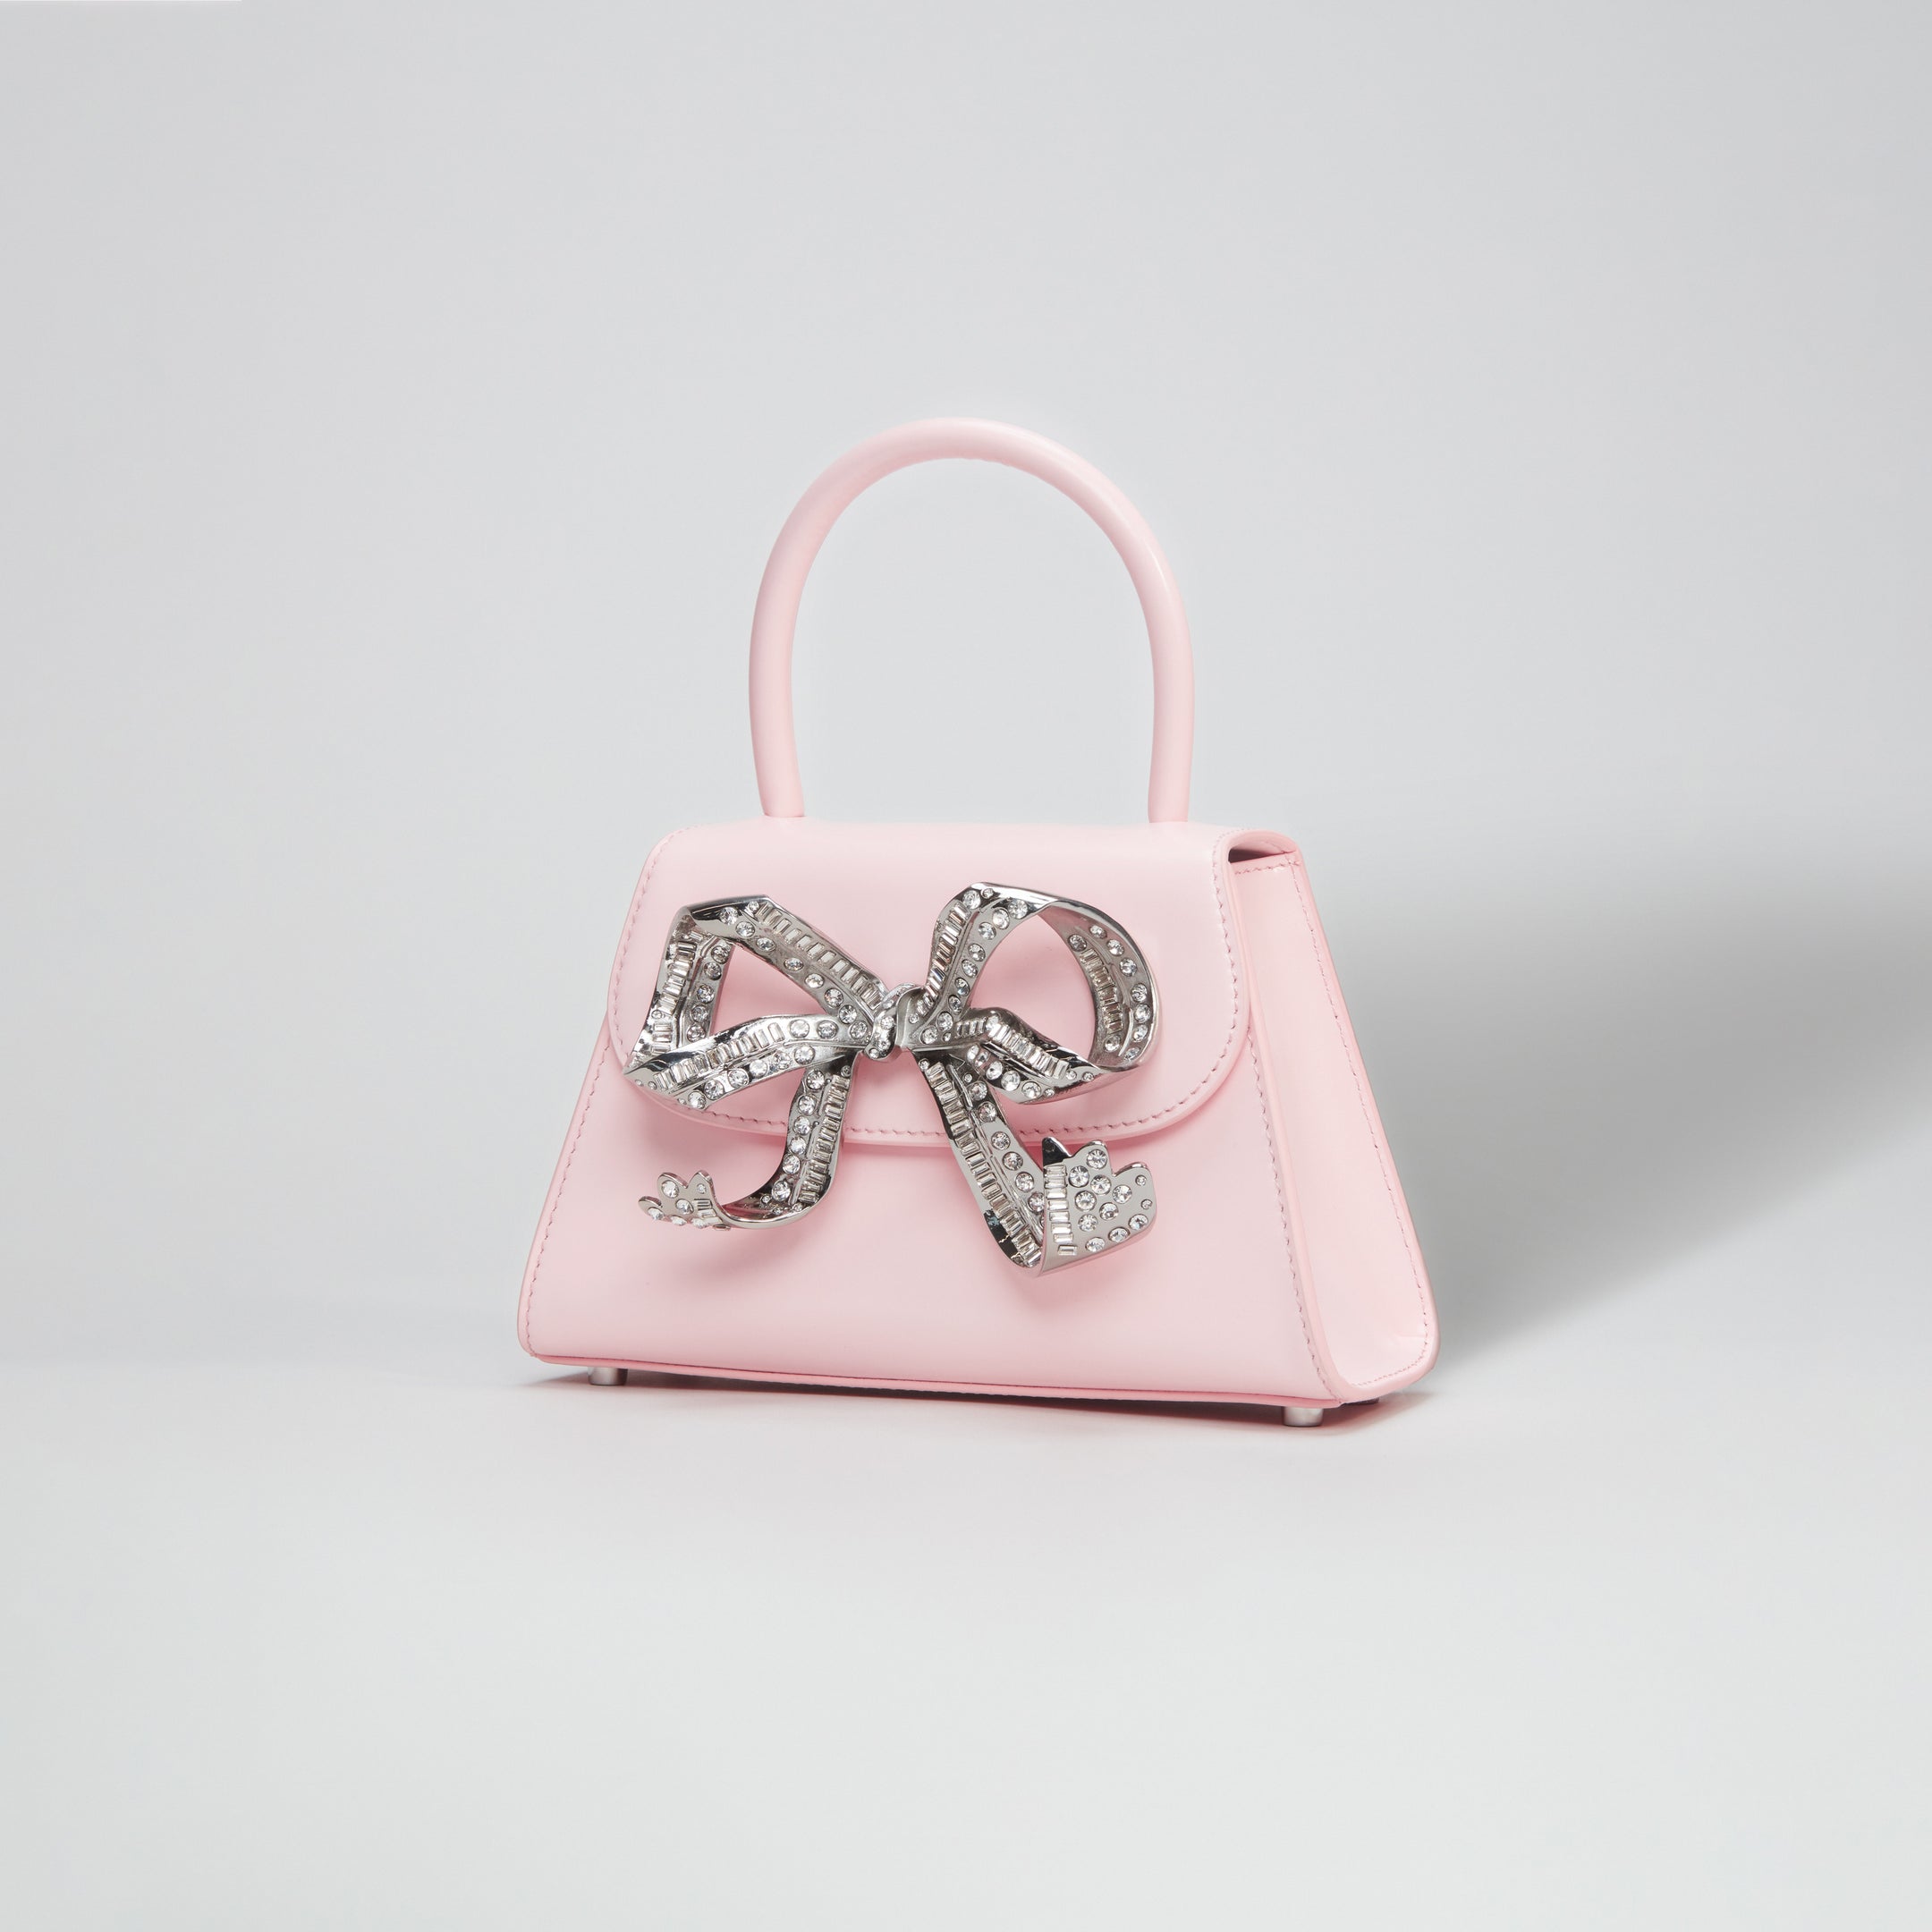 The Bow Mini in Pink with Diamanté | self-portrait